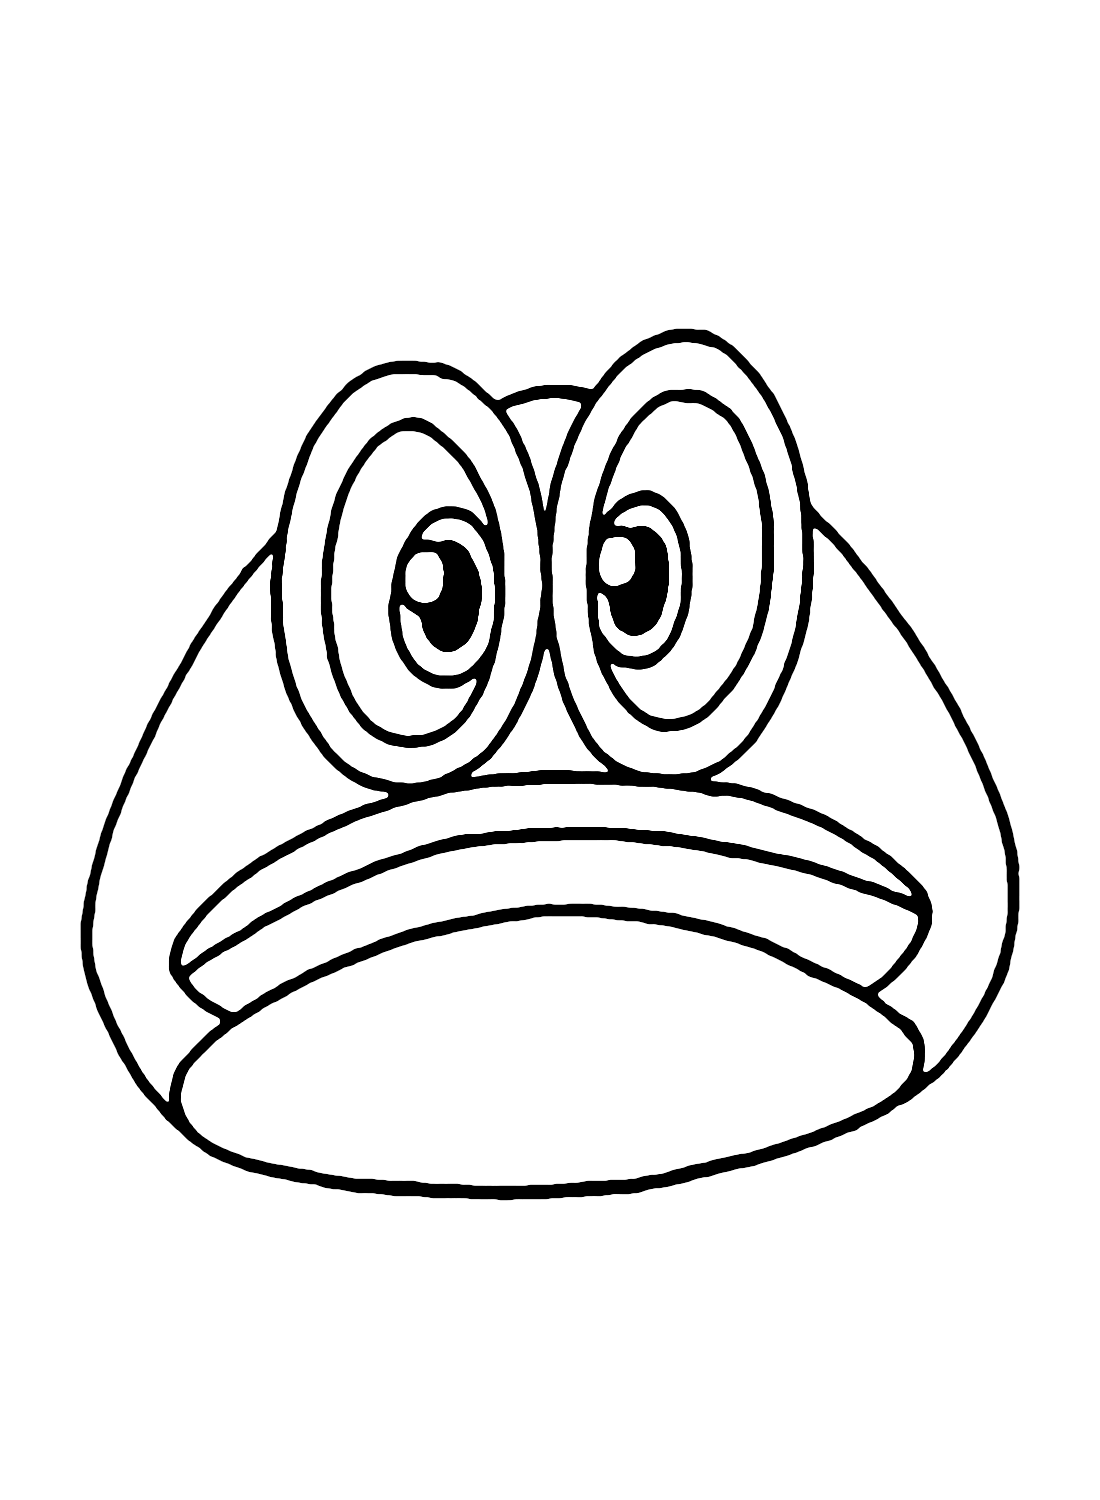 Cappy from Super Mario Odyssey Coloring Pages